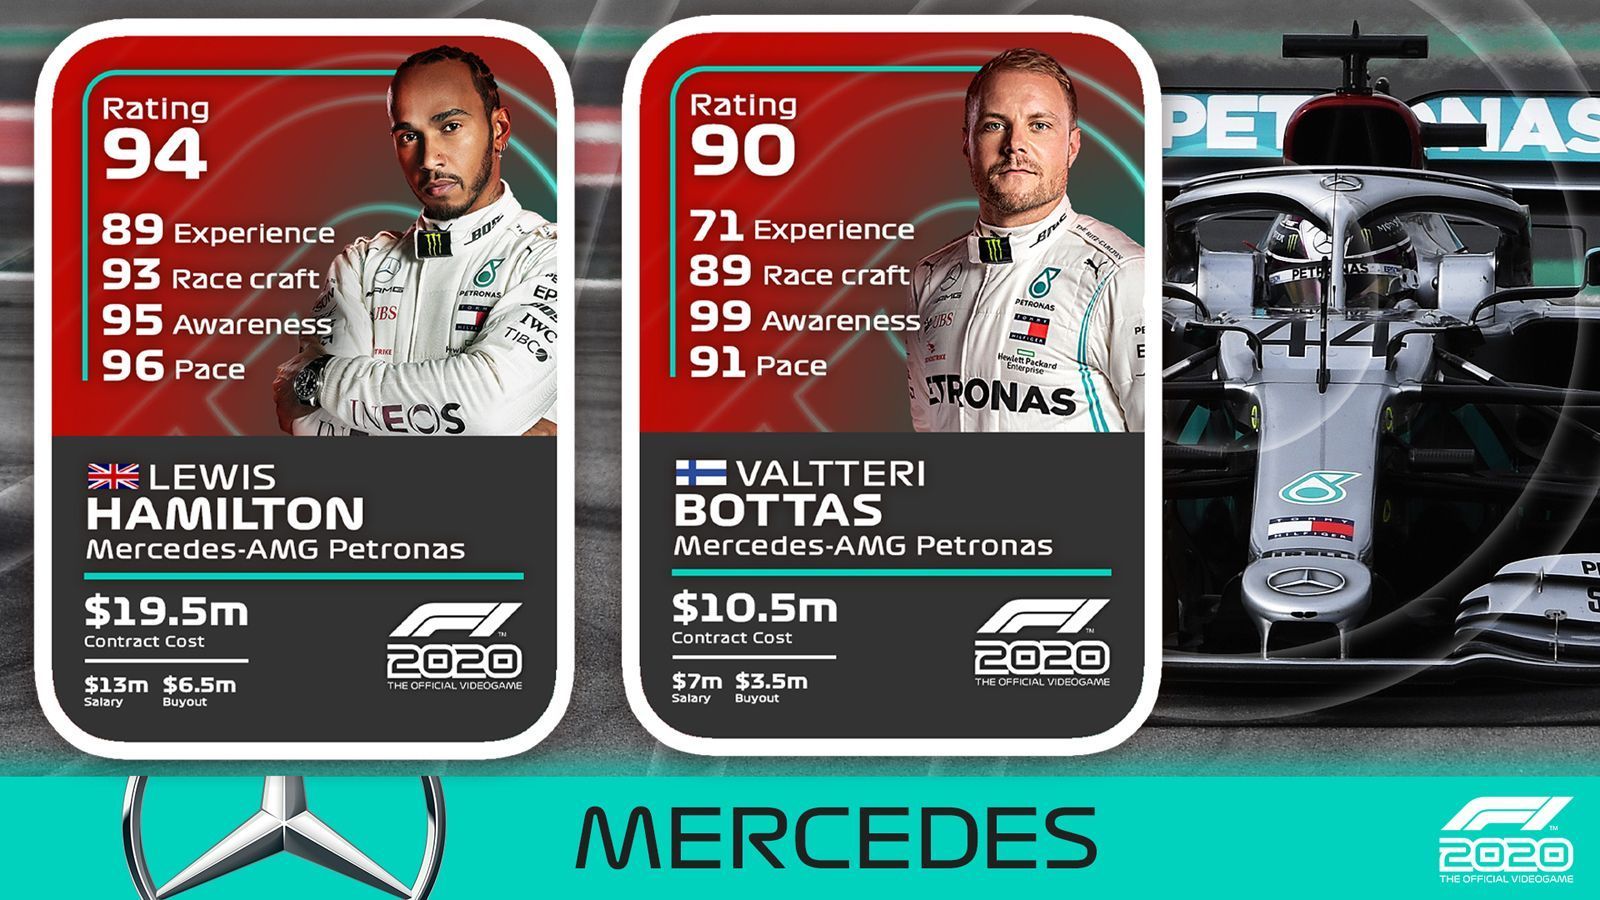 
                <strong>Mercedes</strong><br>
                Lewis Hamilton: Erfahrung 89, Fahrkunst 93, Bewusstsein 95, Pace 96, Overall Rating 94Valtteri Bottas: Erfahrung 71, Fahrkunst 89, Bewusstsein 99, Pace 91, Overall Rating 90
              